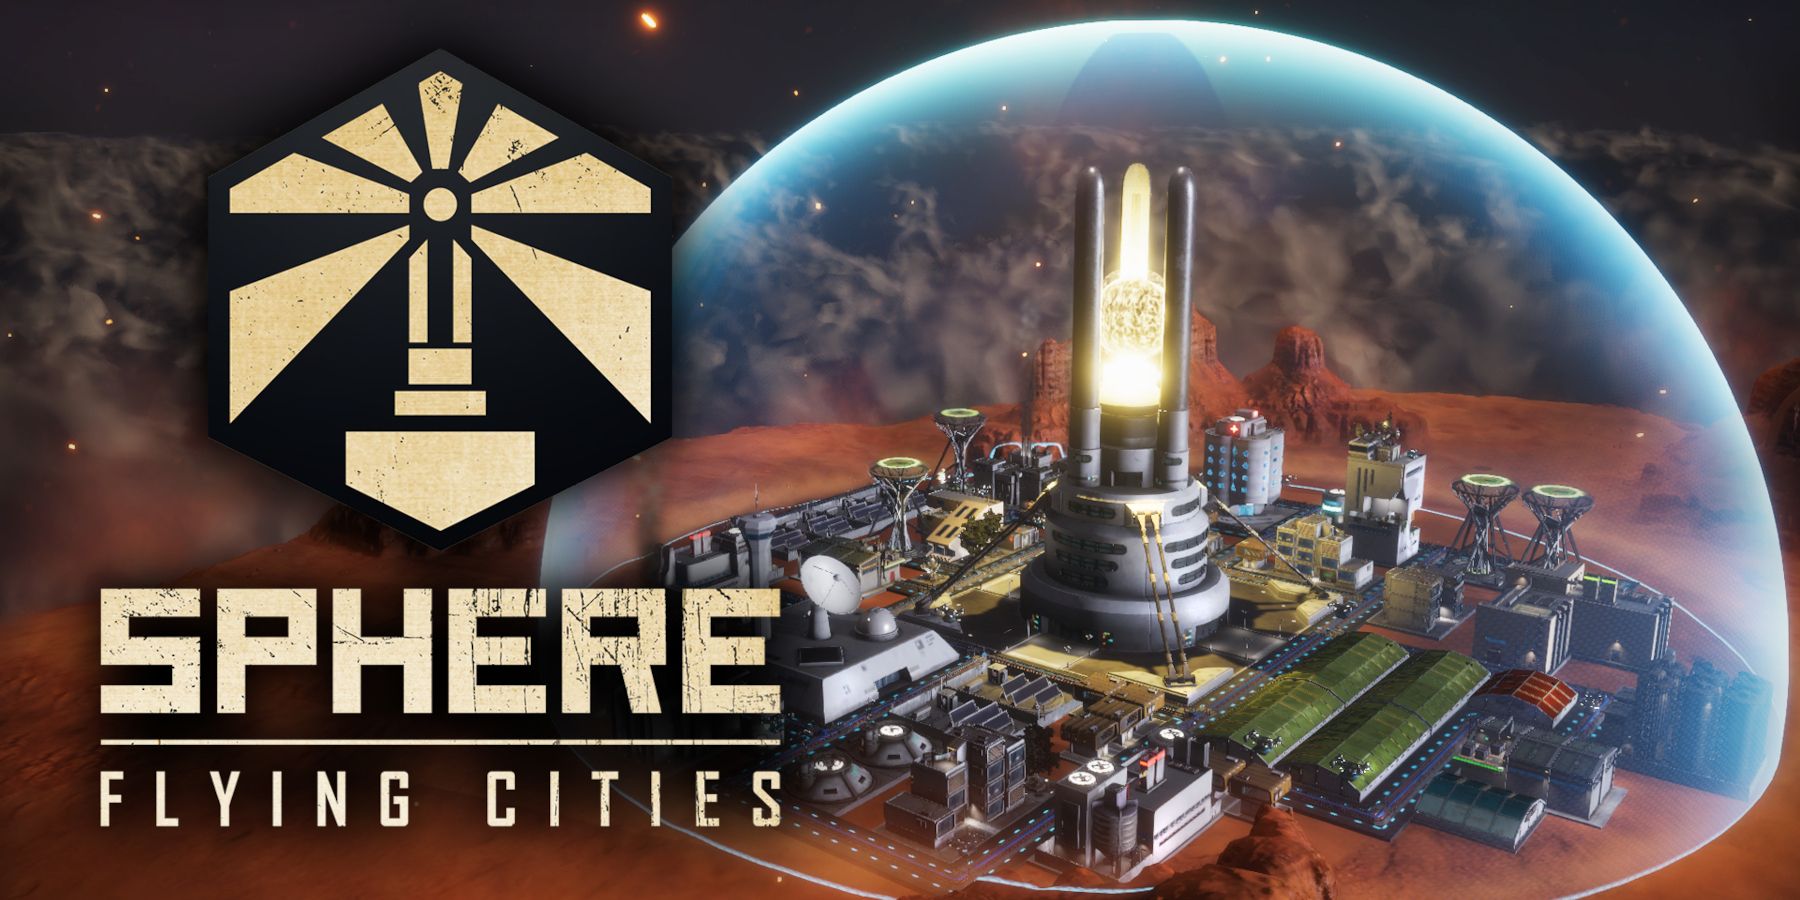 Sphere Flying Cities Preview An Engaging City Building Hybrid